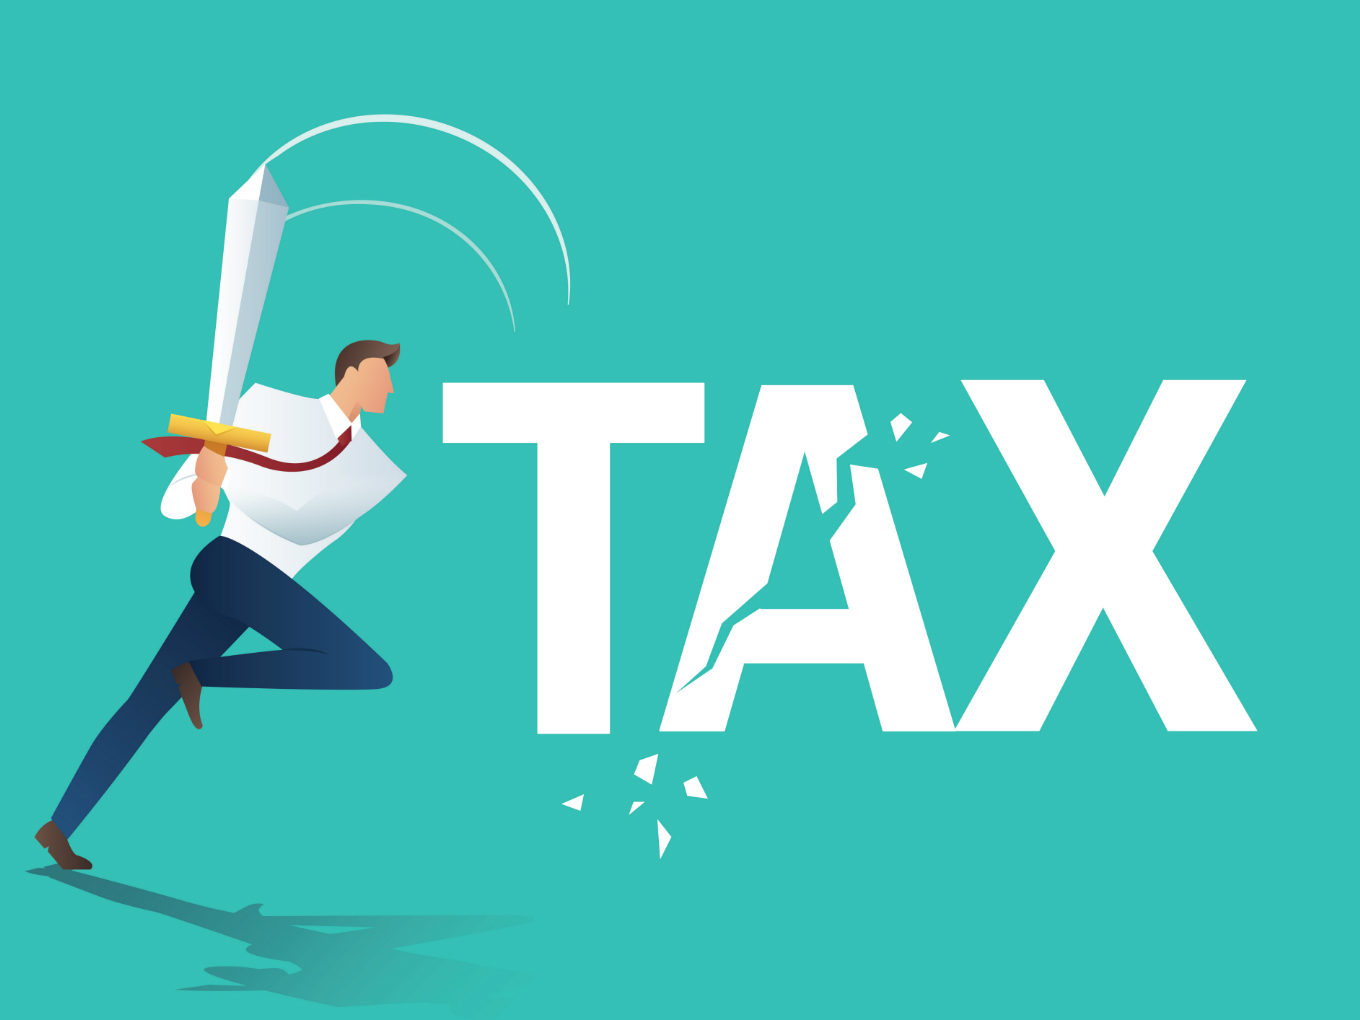 CBDT Starts Acknowledging Angel Tax Submissions But It’s Not Enough, Say Stakeholders